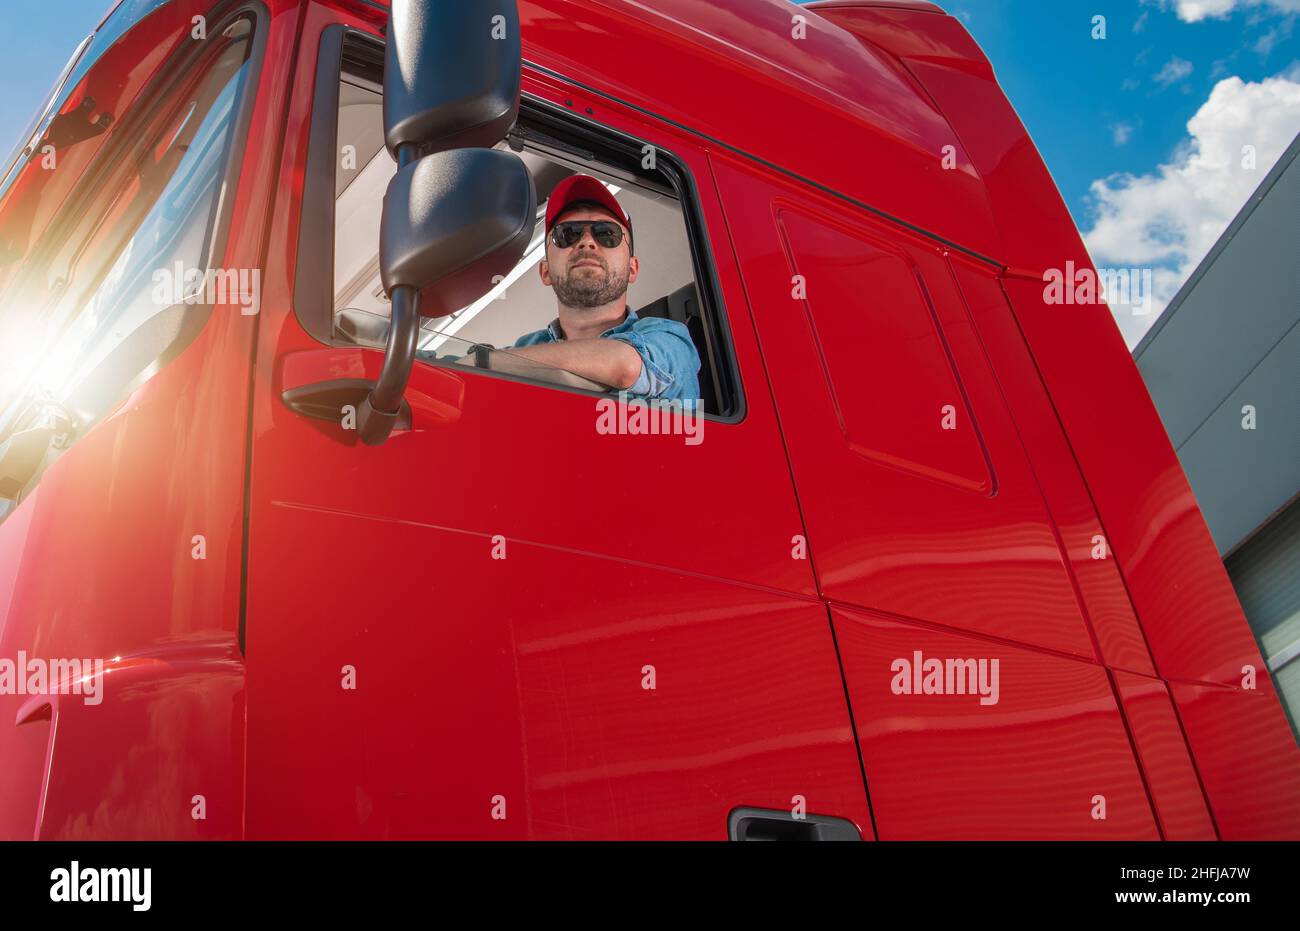 Professional Caucasian Trucker in His 30s Wearing Sunglasses Behind the Semi Tractor Truck Wheel. Commercial Transportation Industry. Stock Photo